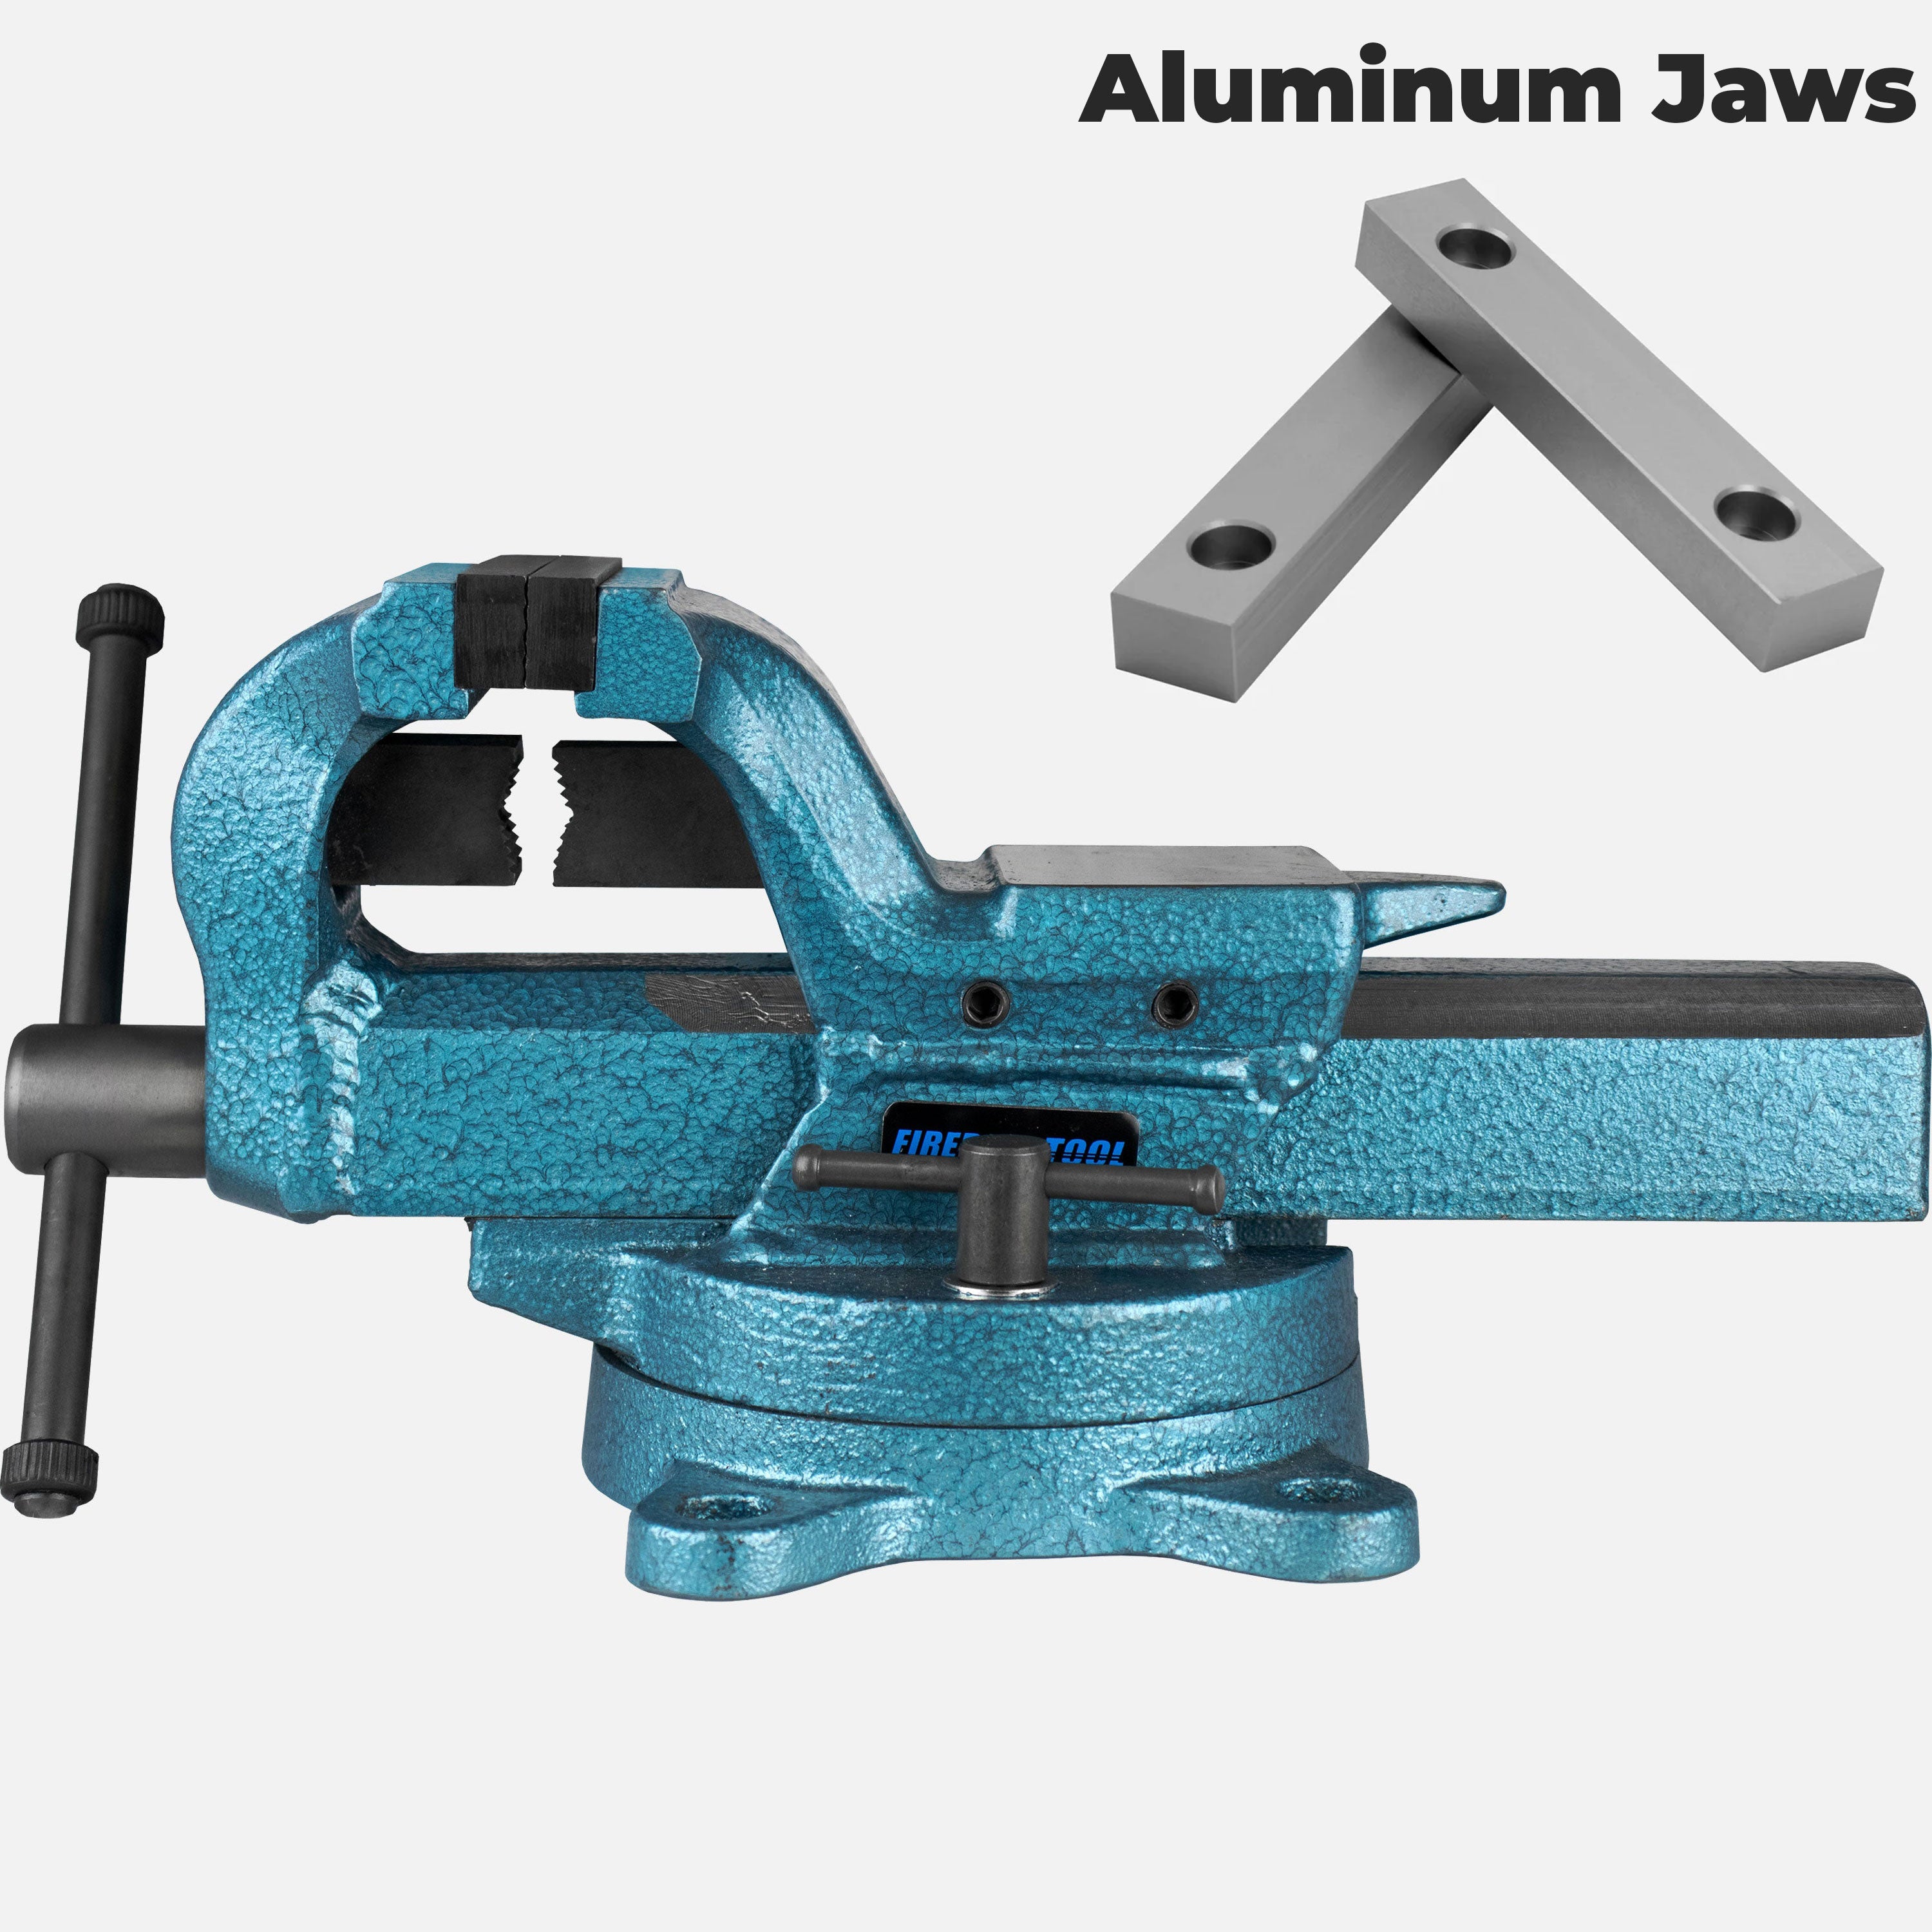 Forged Bench Vise (4" Jaw)